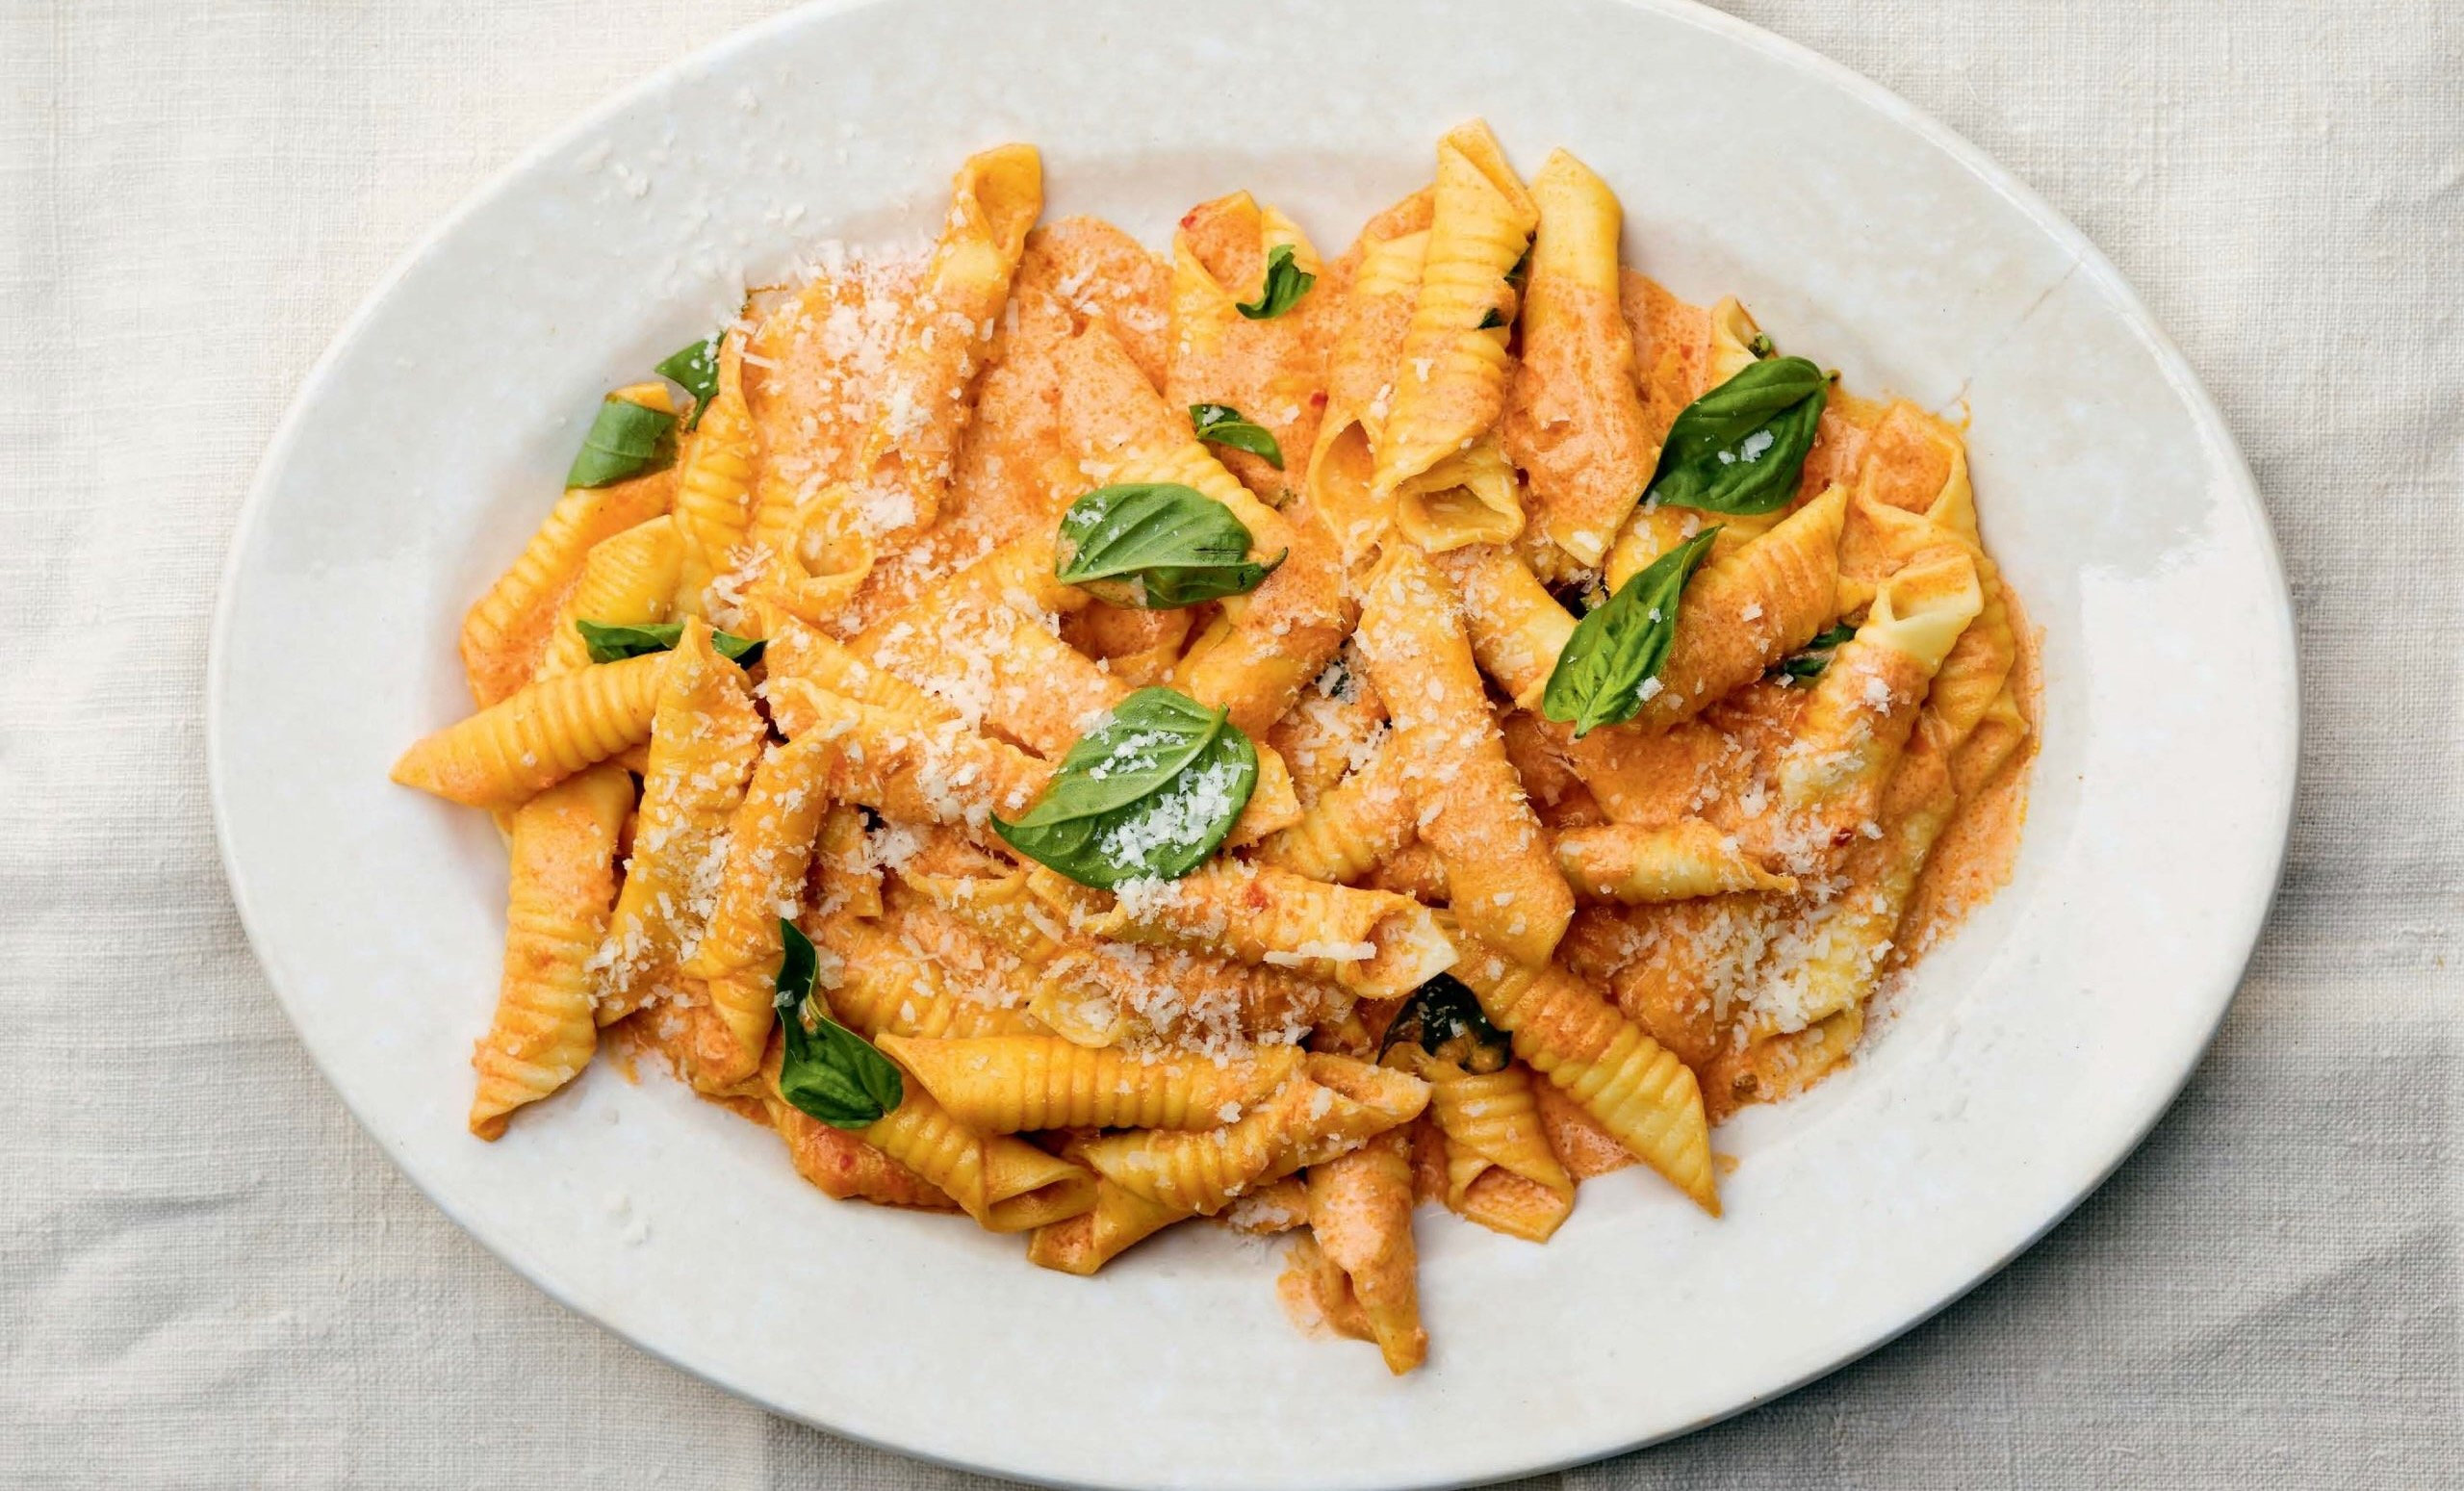 pasta with vodka sauce recipe by Odette Williams